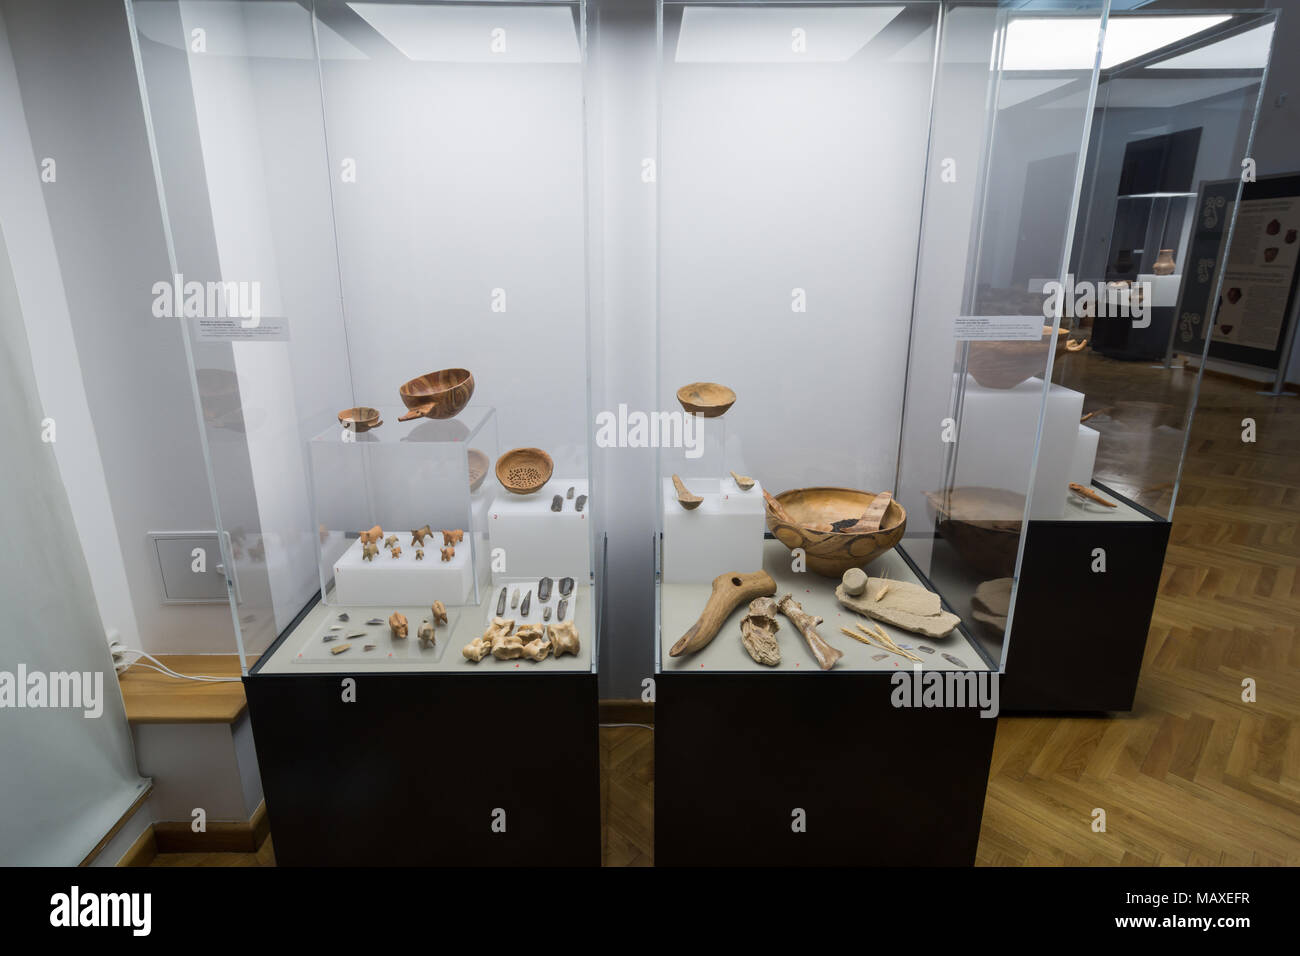 Cucuteni culture ancient old objects displayed at the Culture Palace Museum in  Iasi, Romania Stock Photo